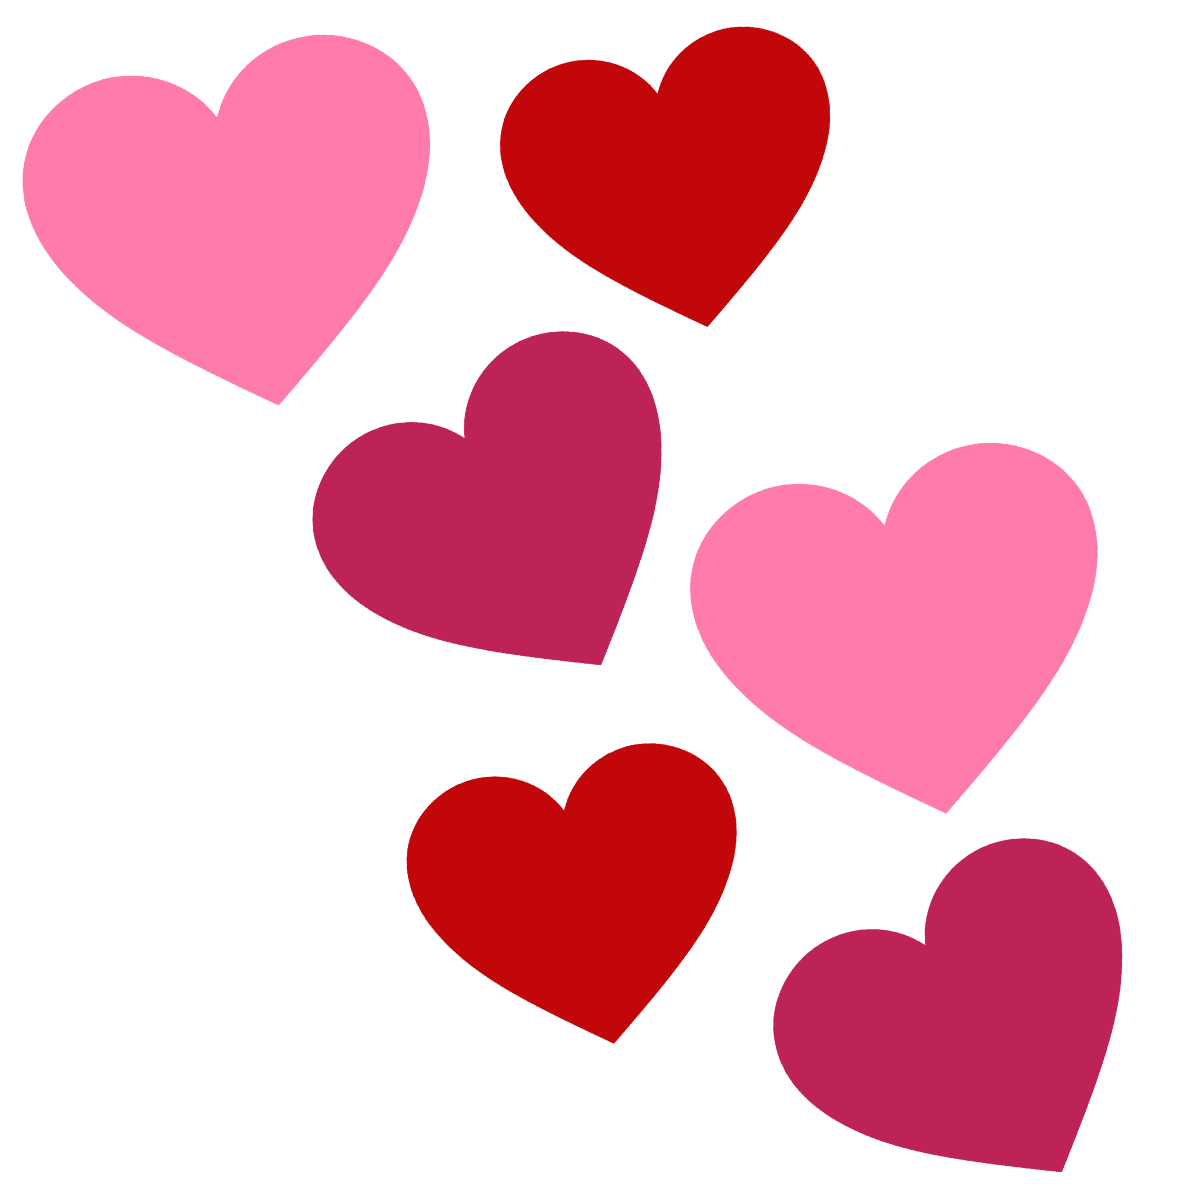 Heart free large images. Hearts clipart png